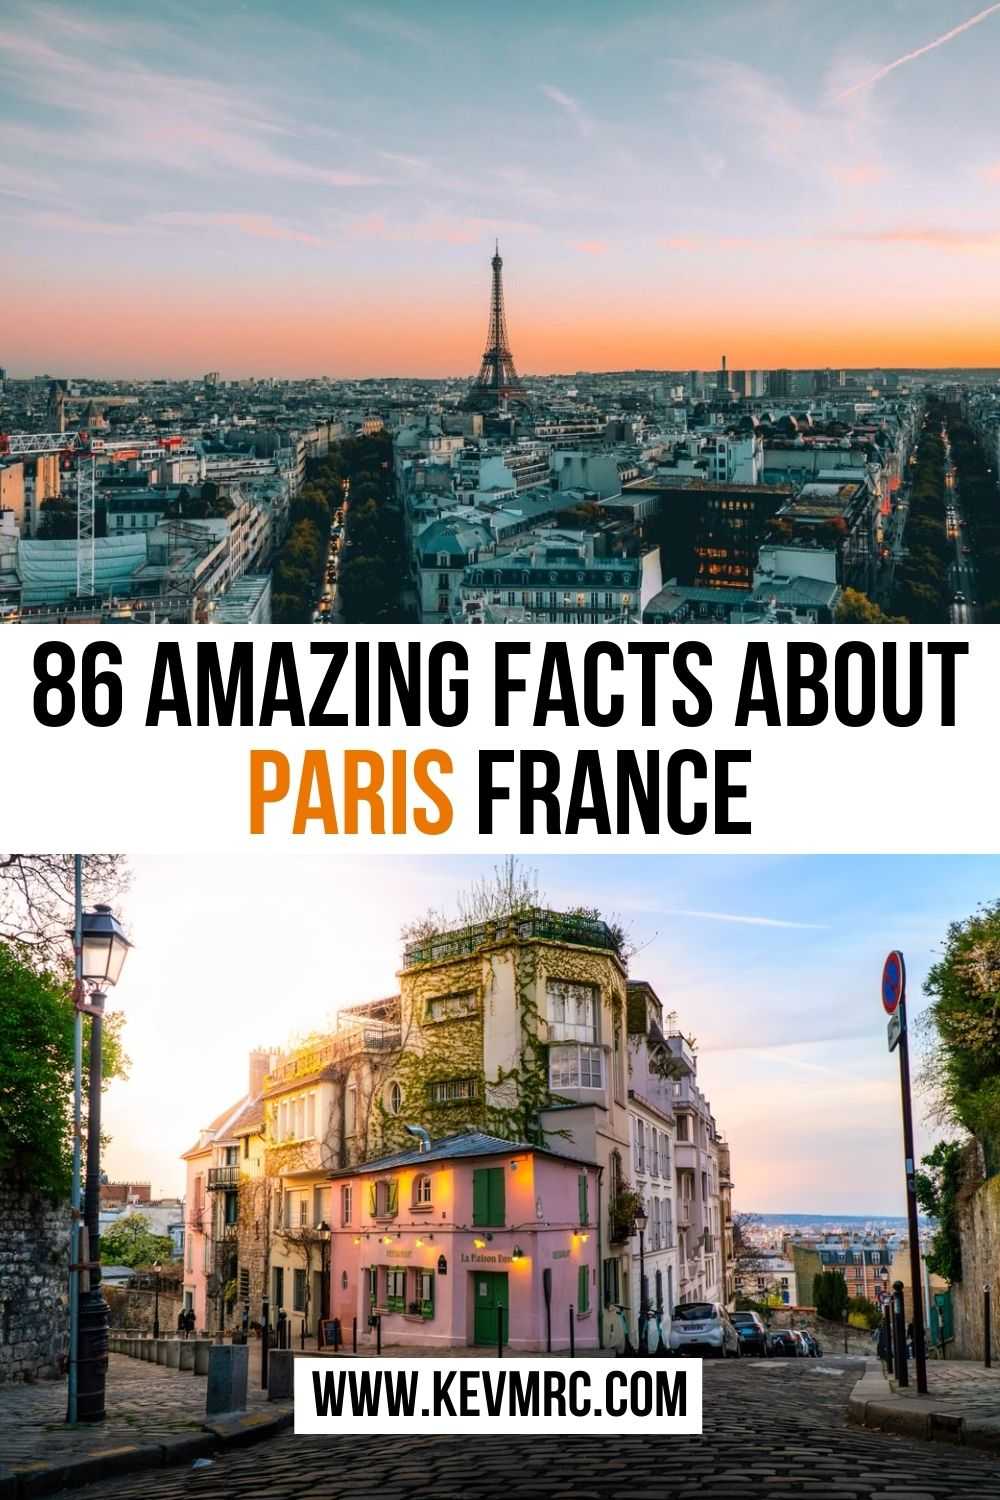 Paris is the capital of France, and one of the most visited city in the world. Learn more about the city of lights thanks to these 86 interesting facts about Paris. paris fun facts | fun facts about paris | paris facts